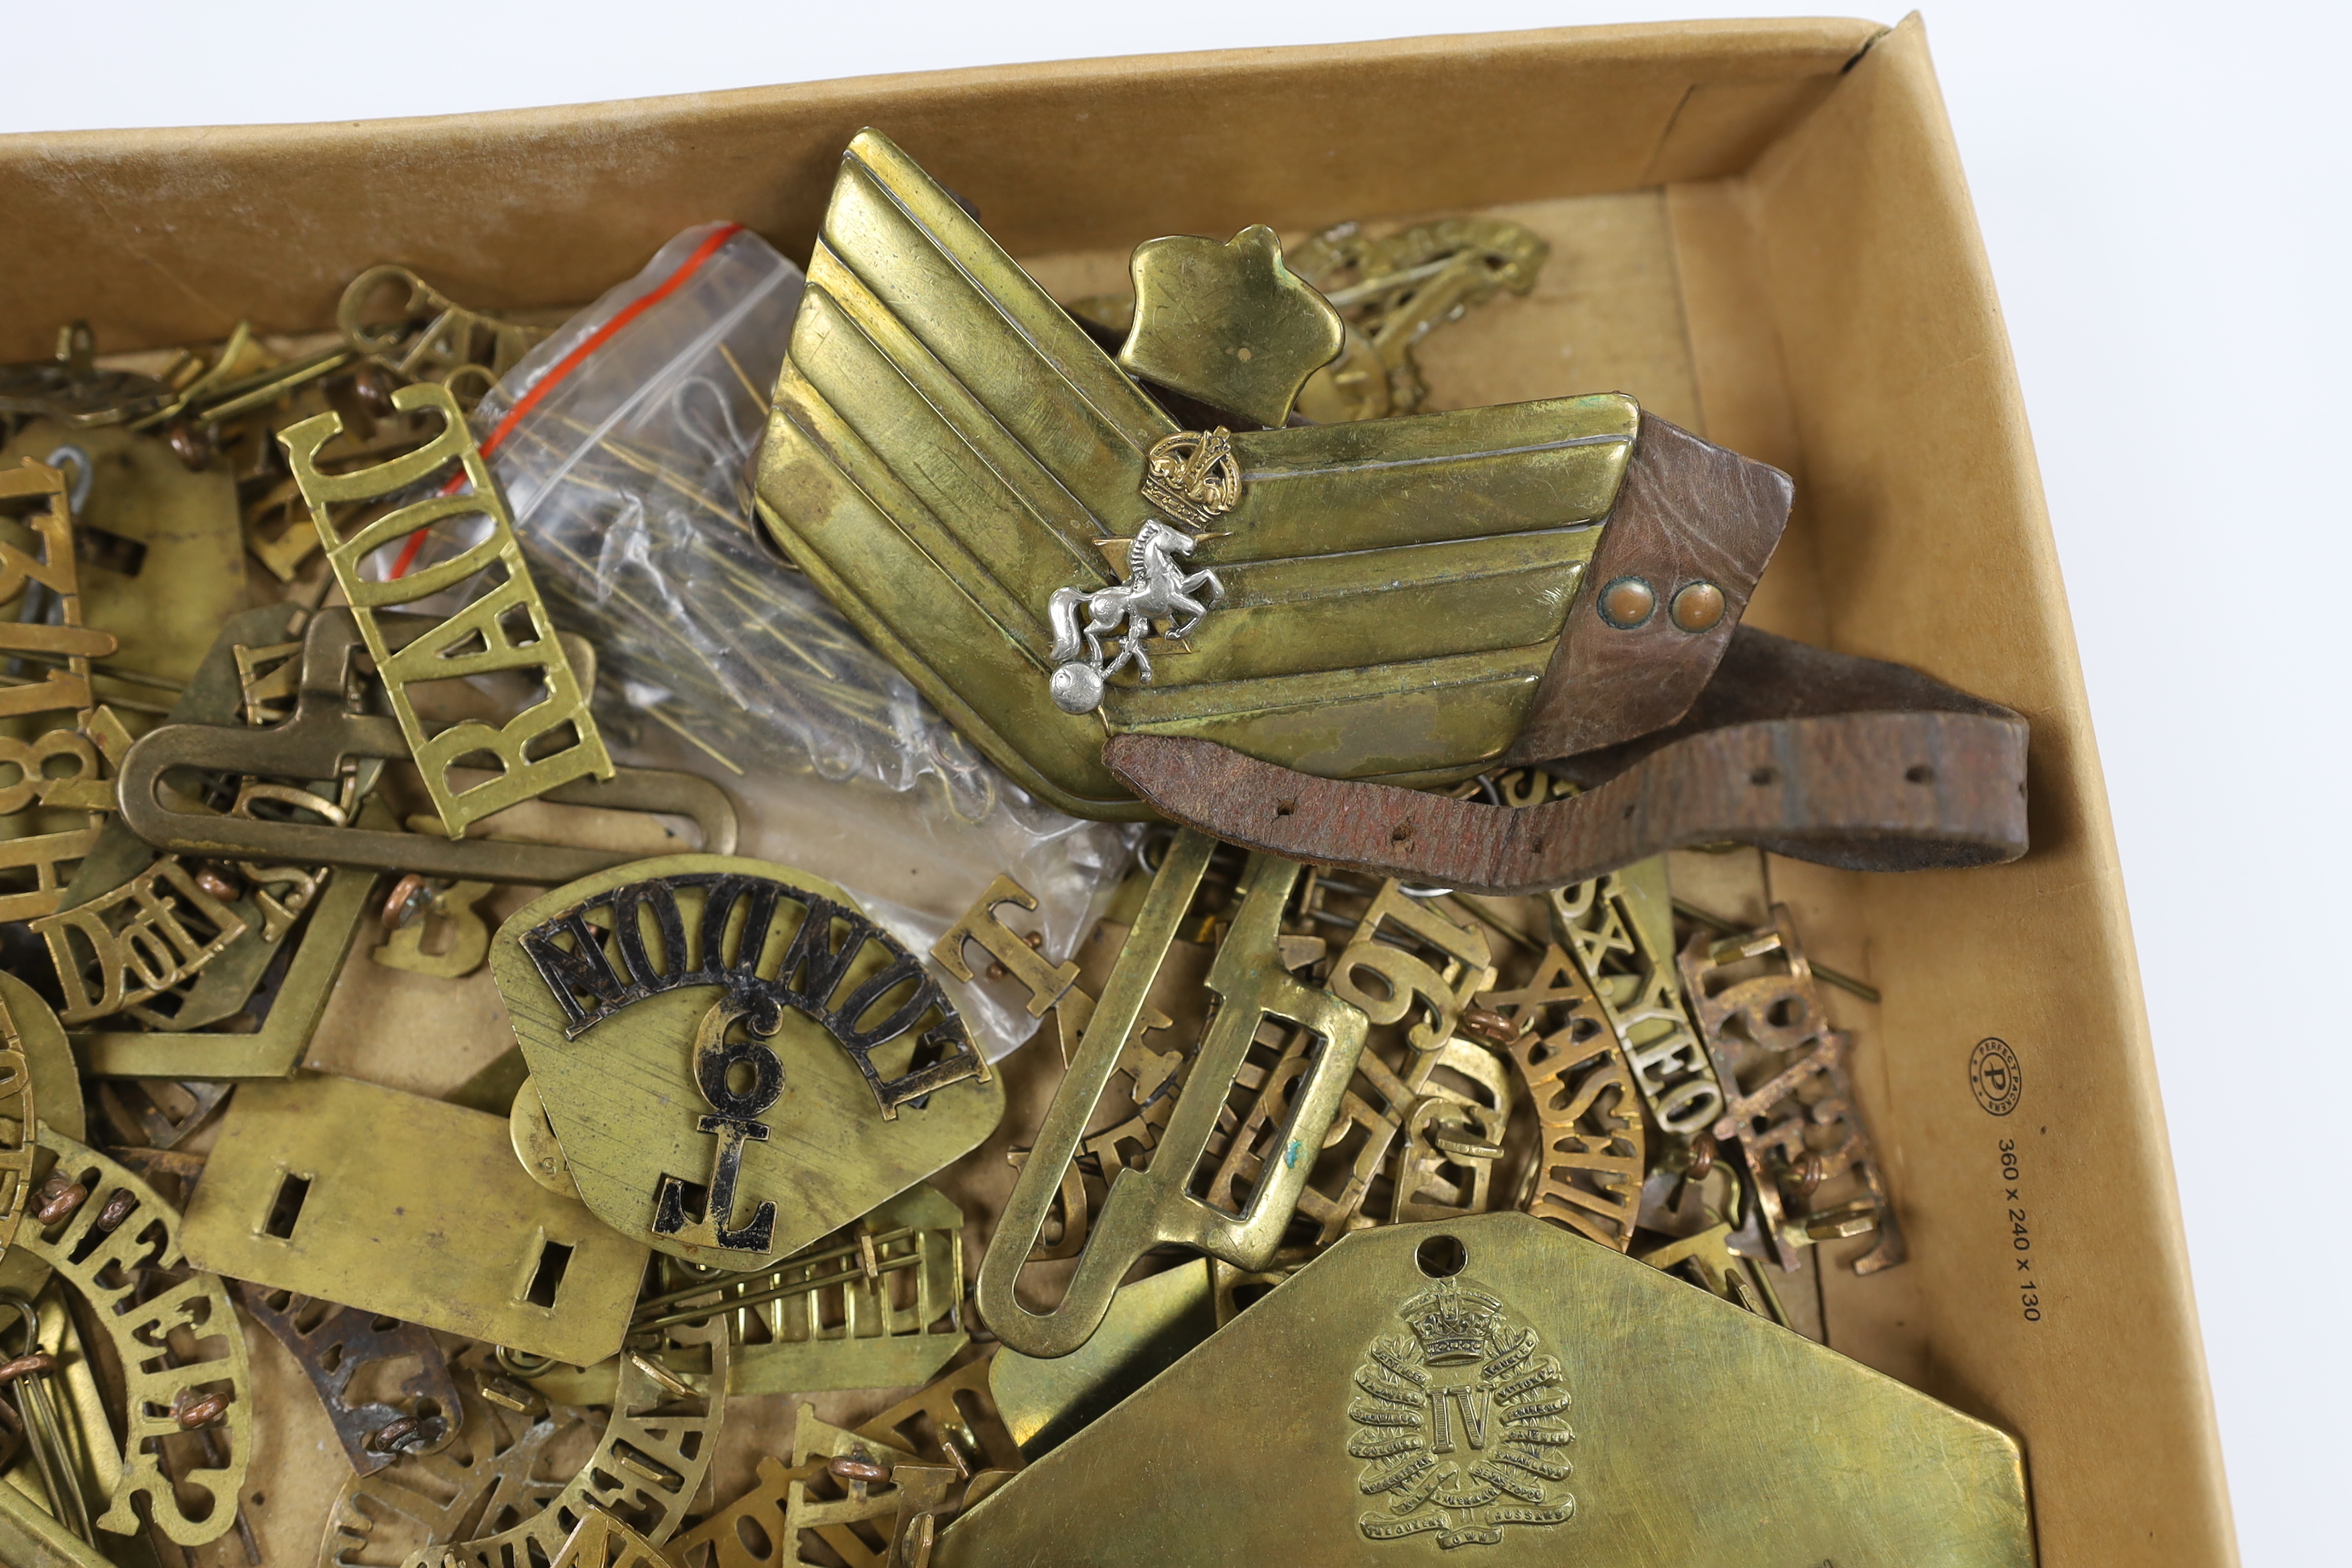 A collection of military cap badges, shoulder titles, pins, backing plates, belt buckles, etc.